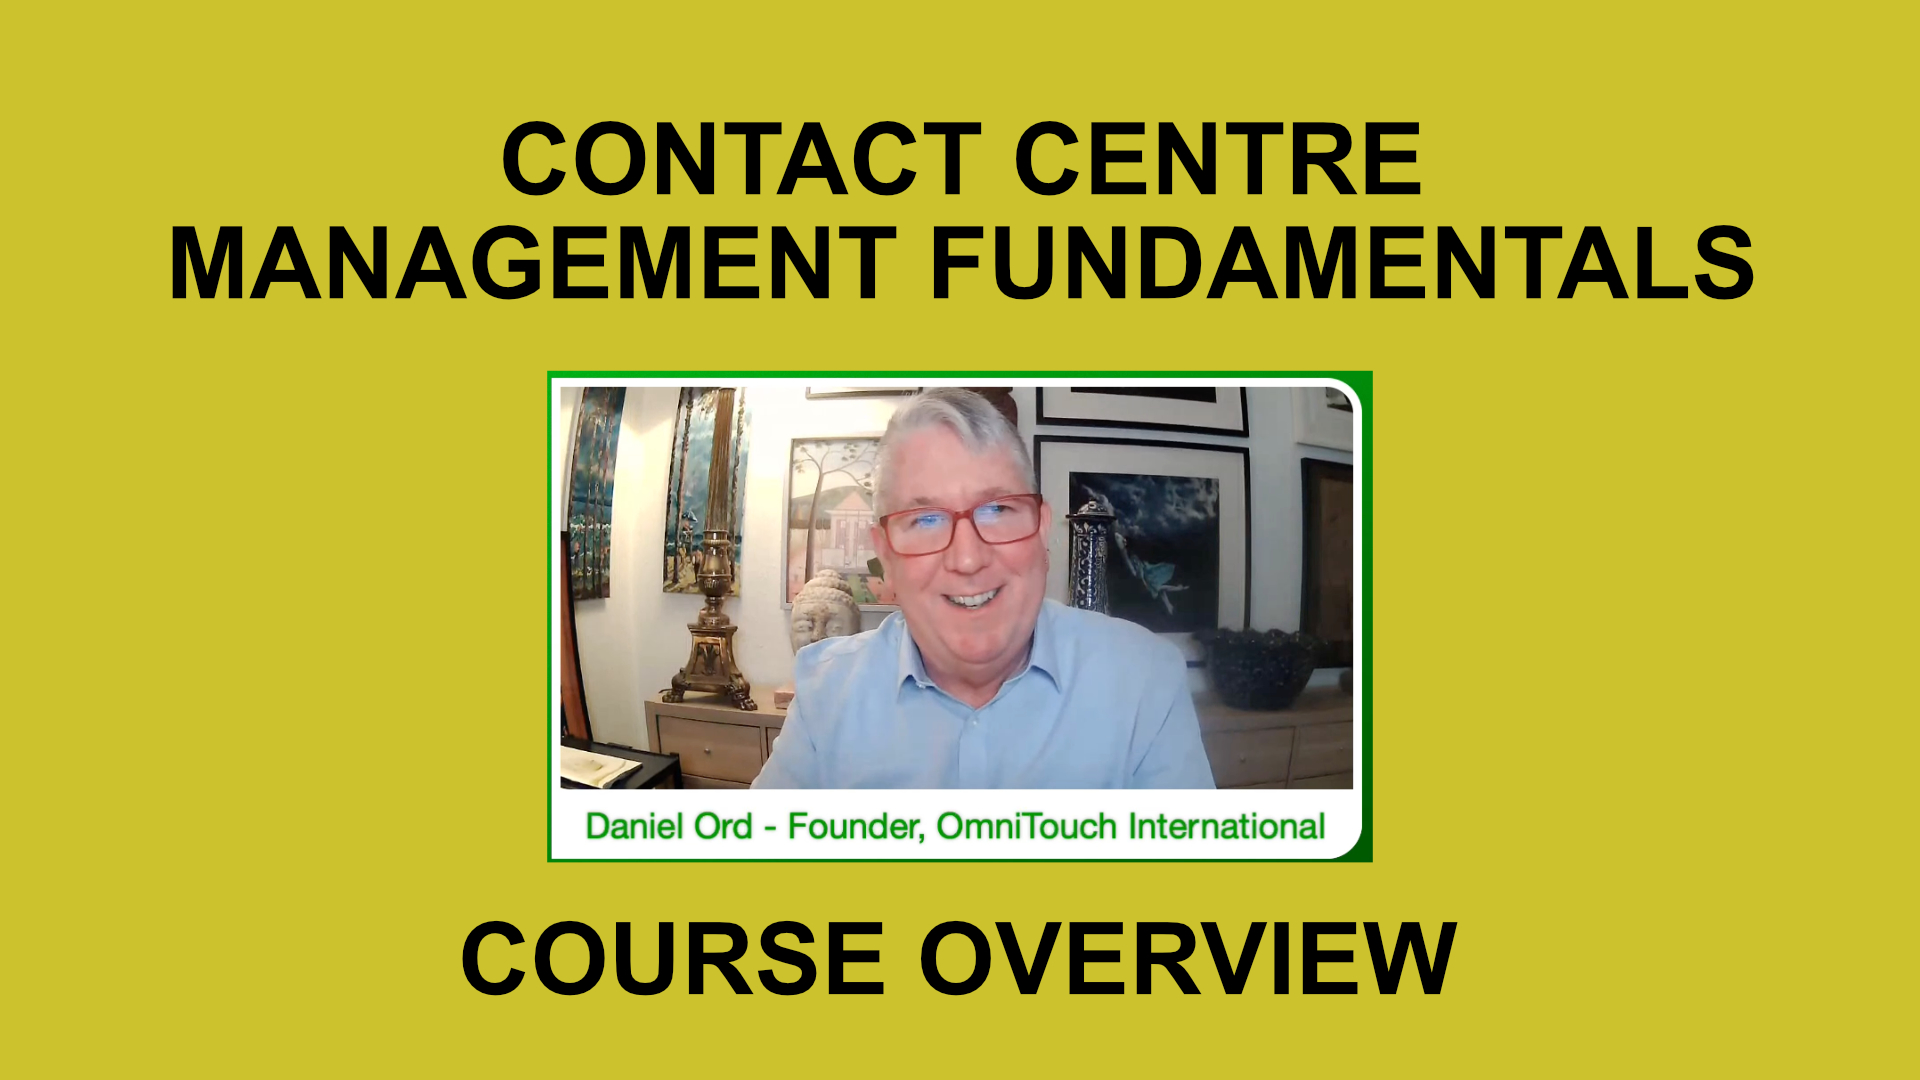 Contact Centre Management Fundamentals course overview video with Daniel Ord